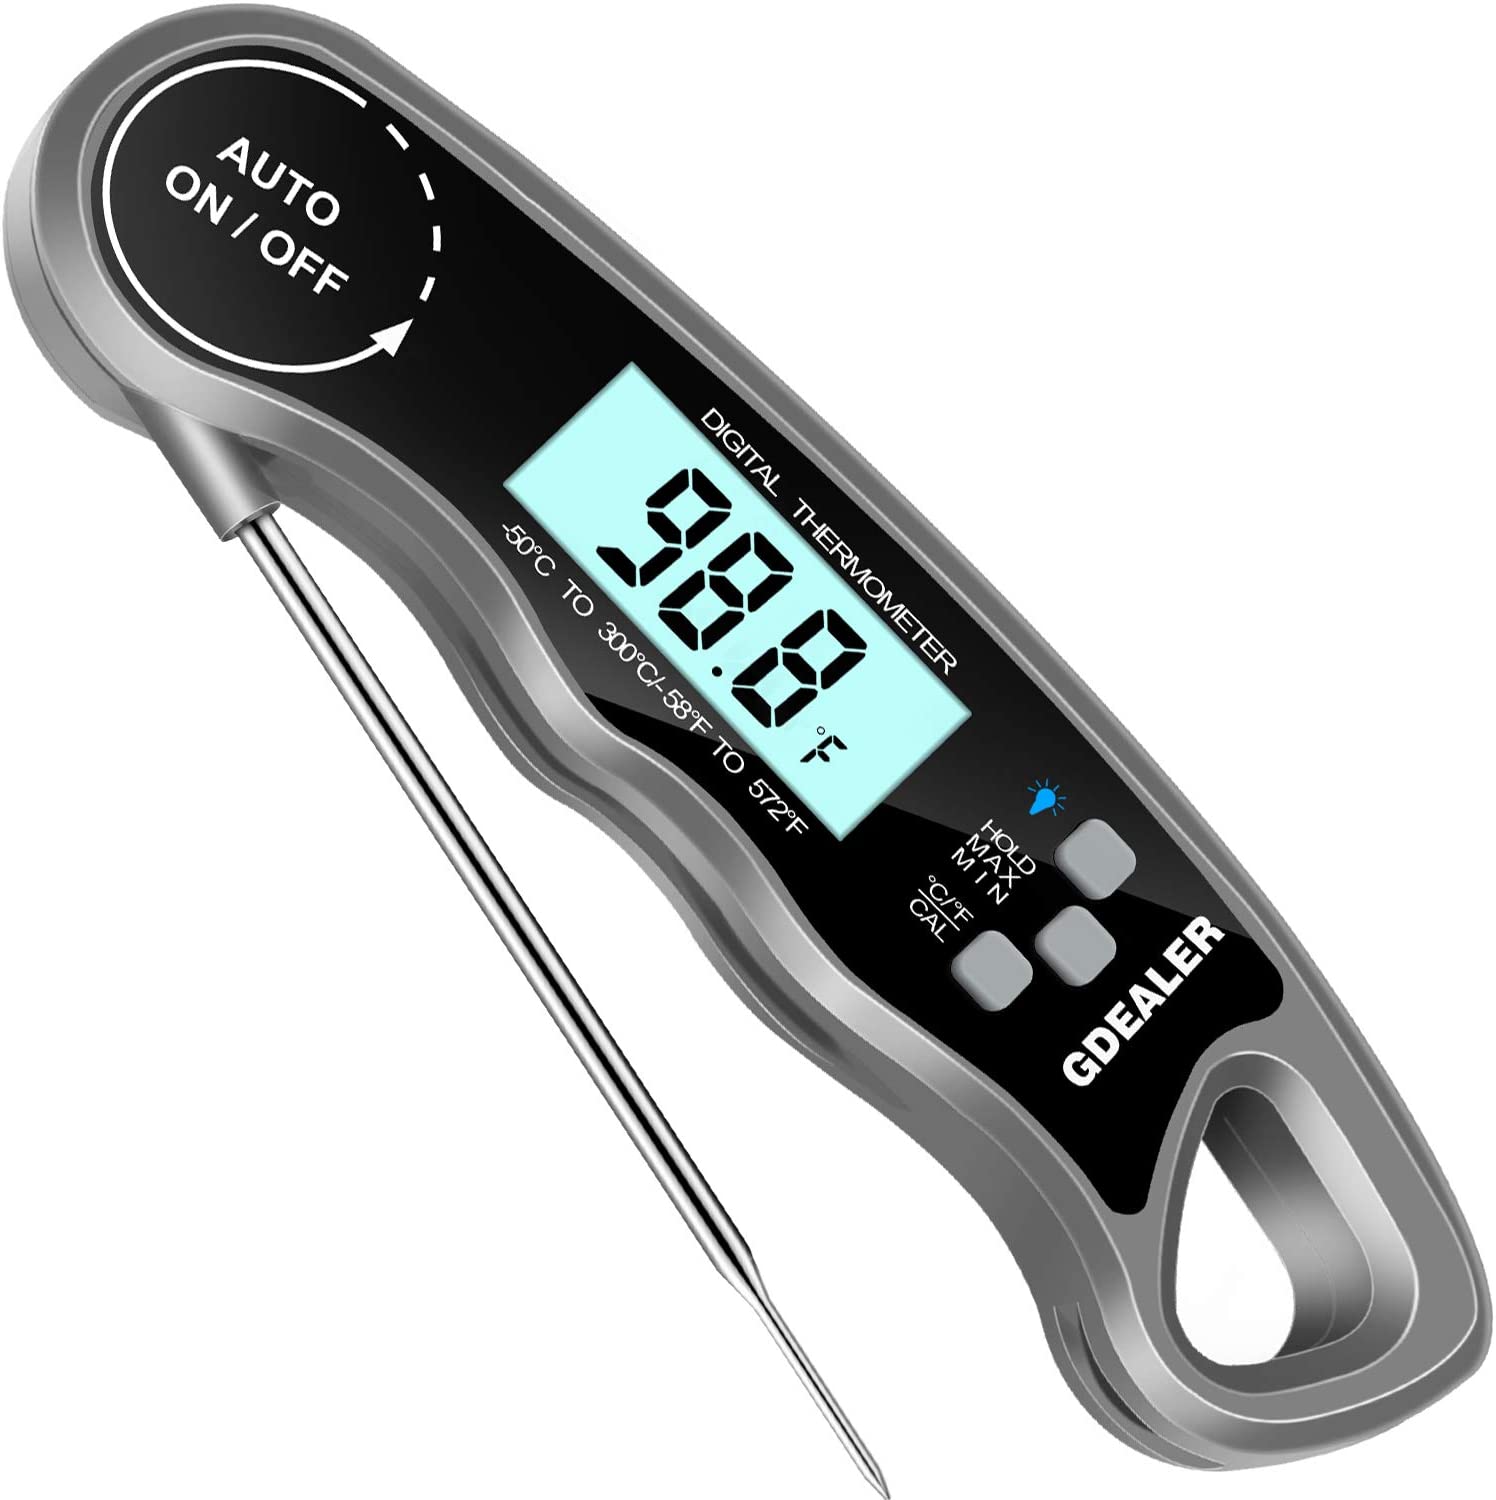 GDEALER Meat Thermometer Digital Instant Read Thermometer Ultra-Fast Cooking Food Thermometer with 4.6” Folding Probe Calibration Function for Kitchen Milk Candy, BBQ Grill, Smokers Gray